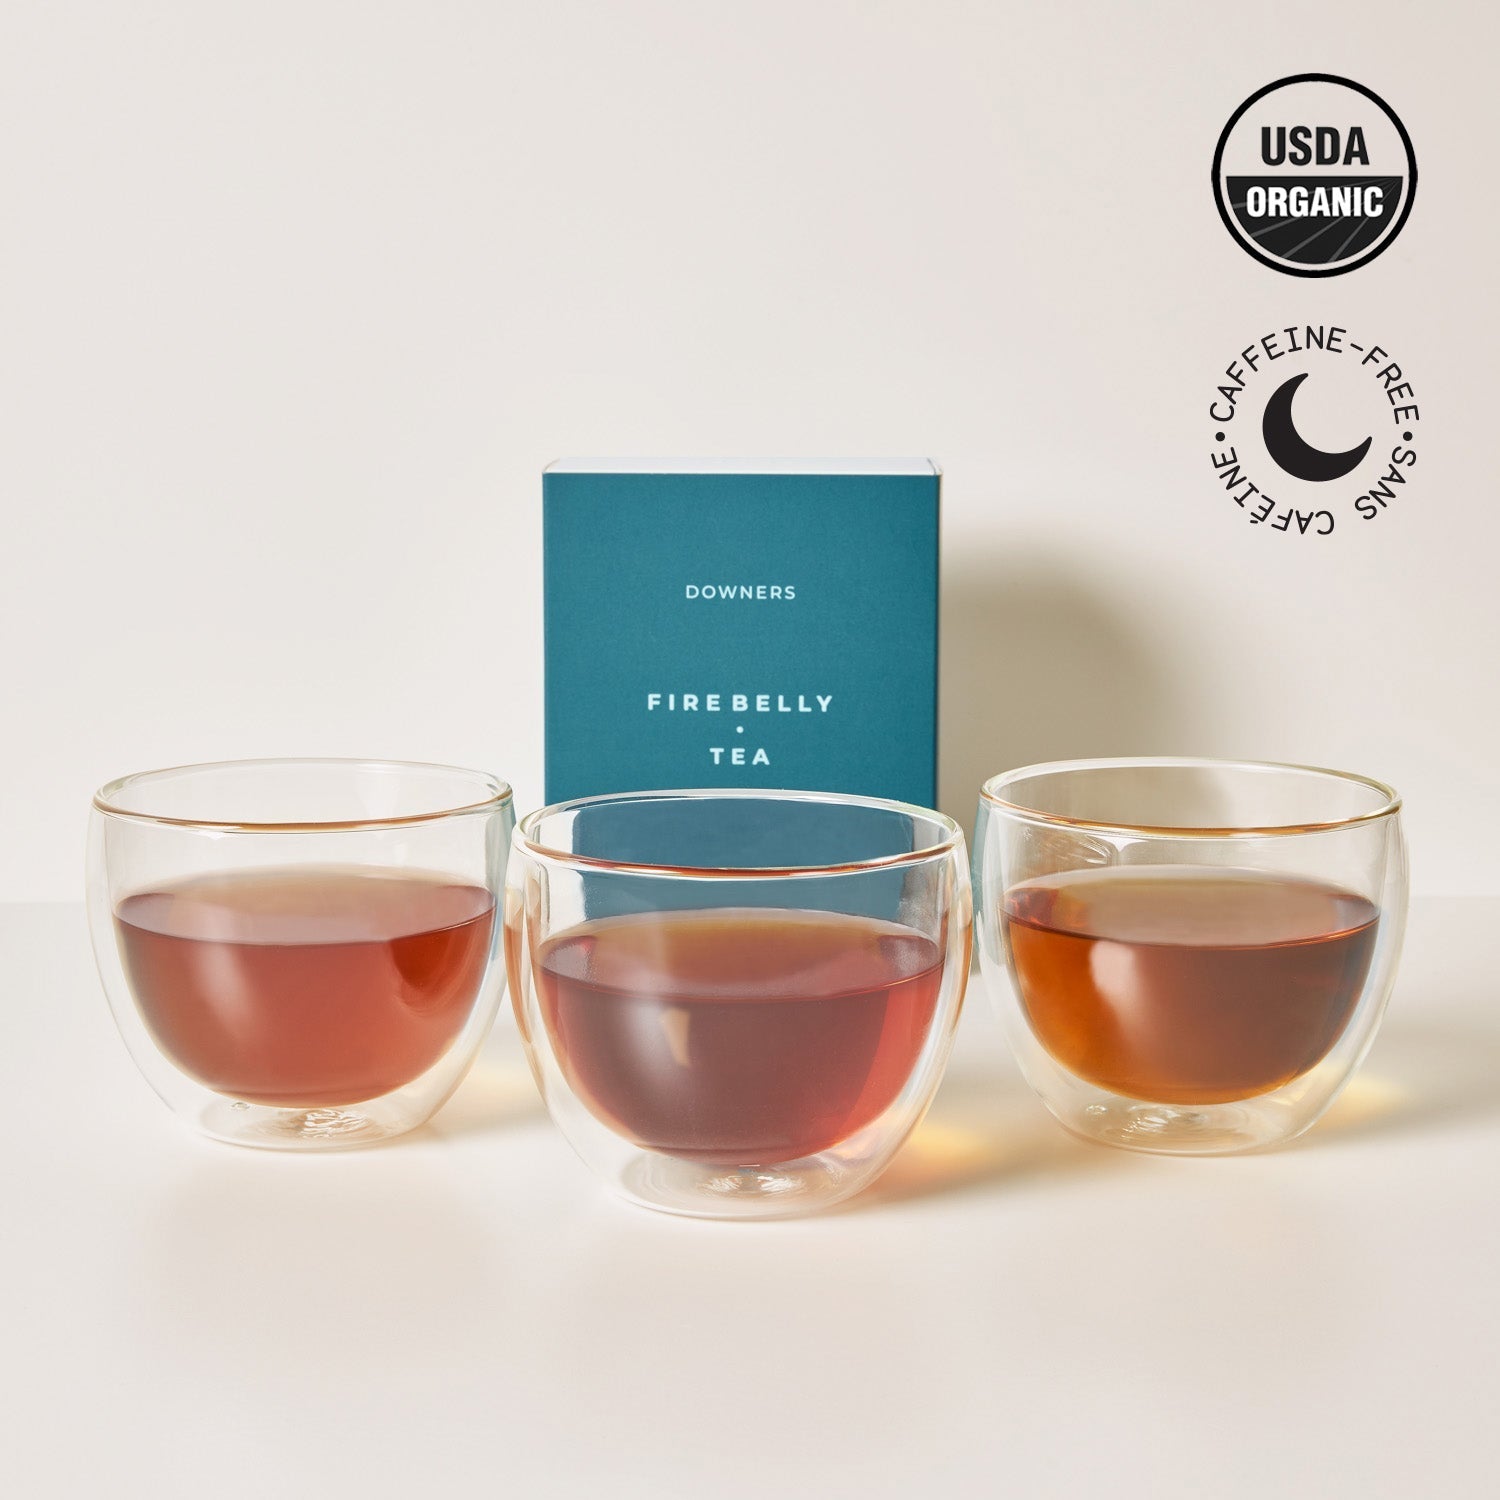 Downers by Firebelly Tea